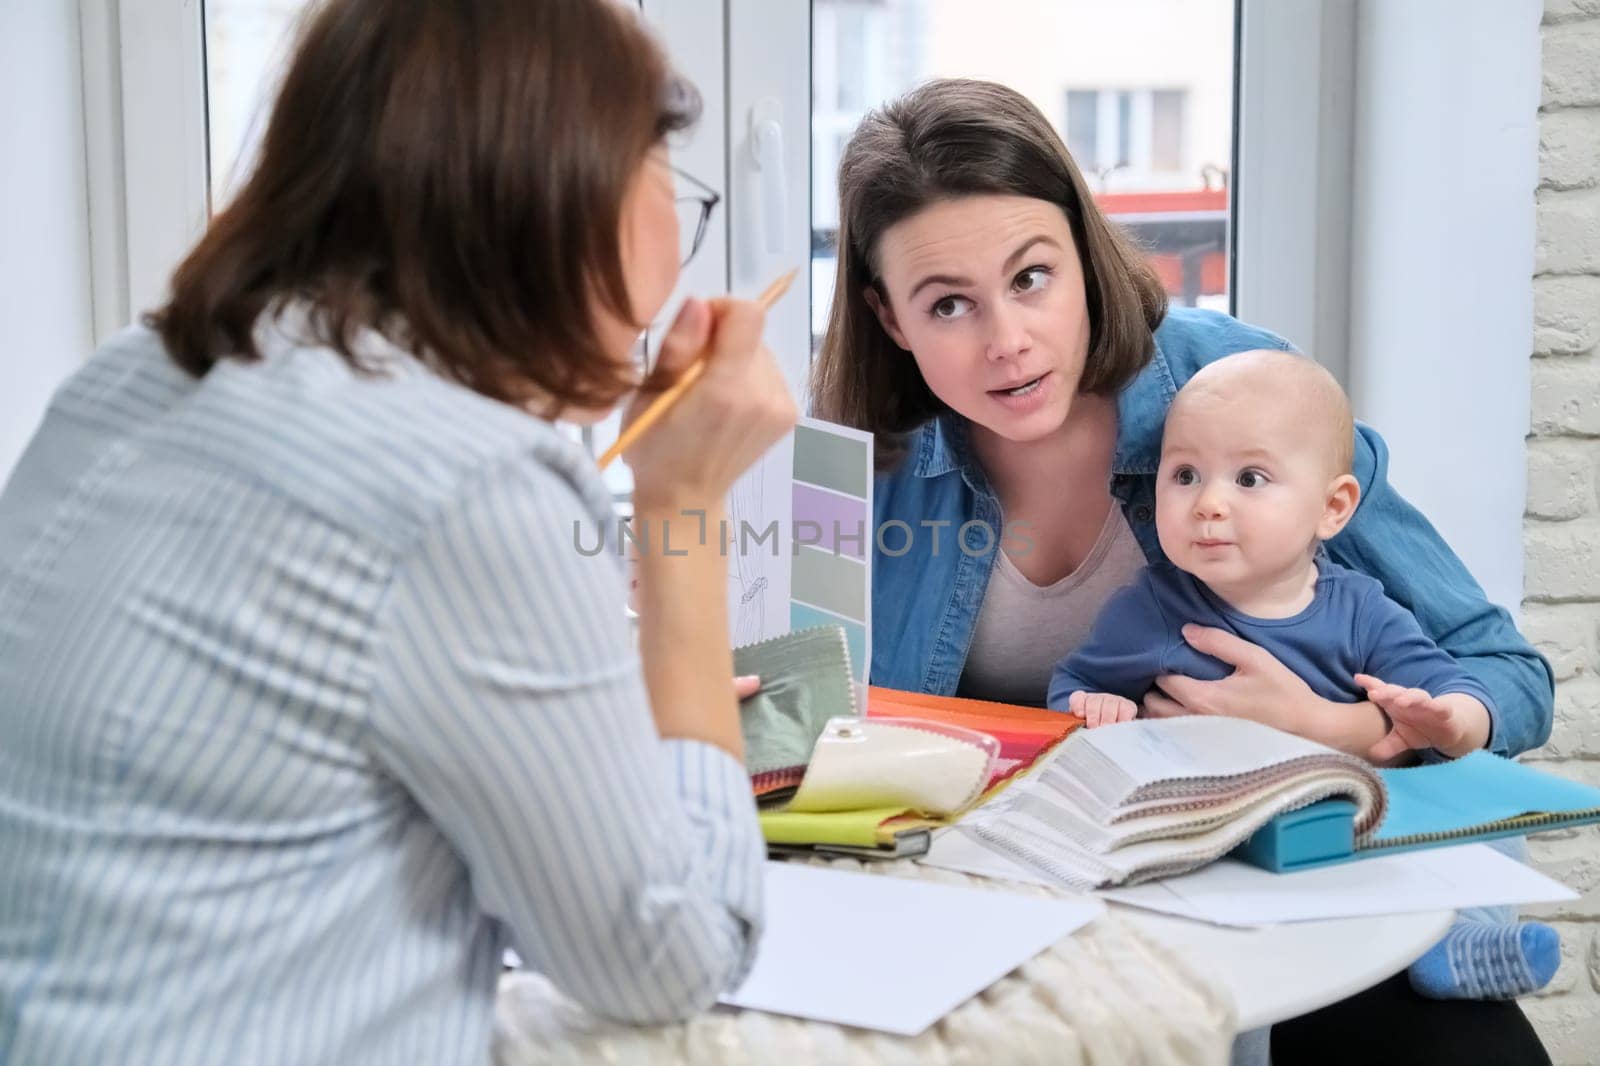 Women interior designer and client with baby choosing fabrics and materials by VH-studio